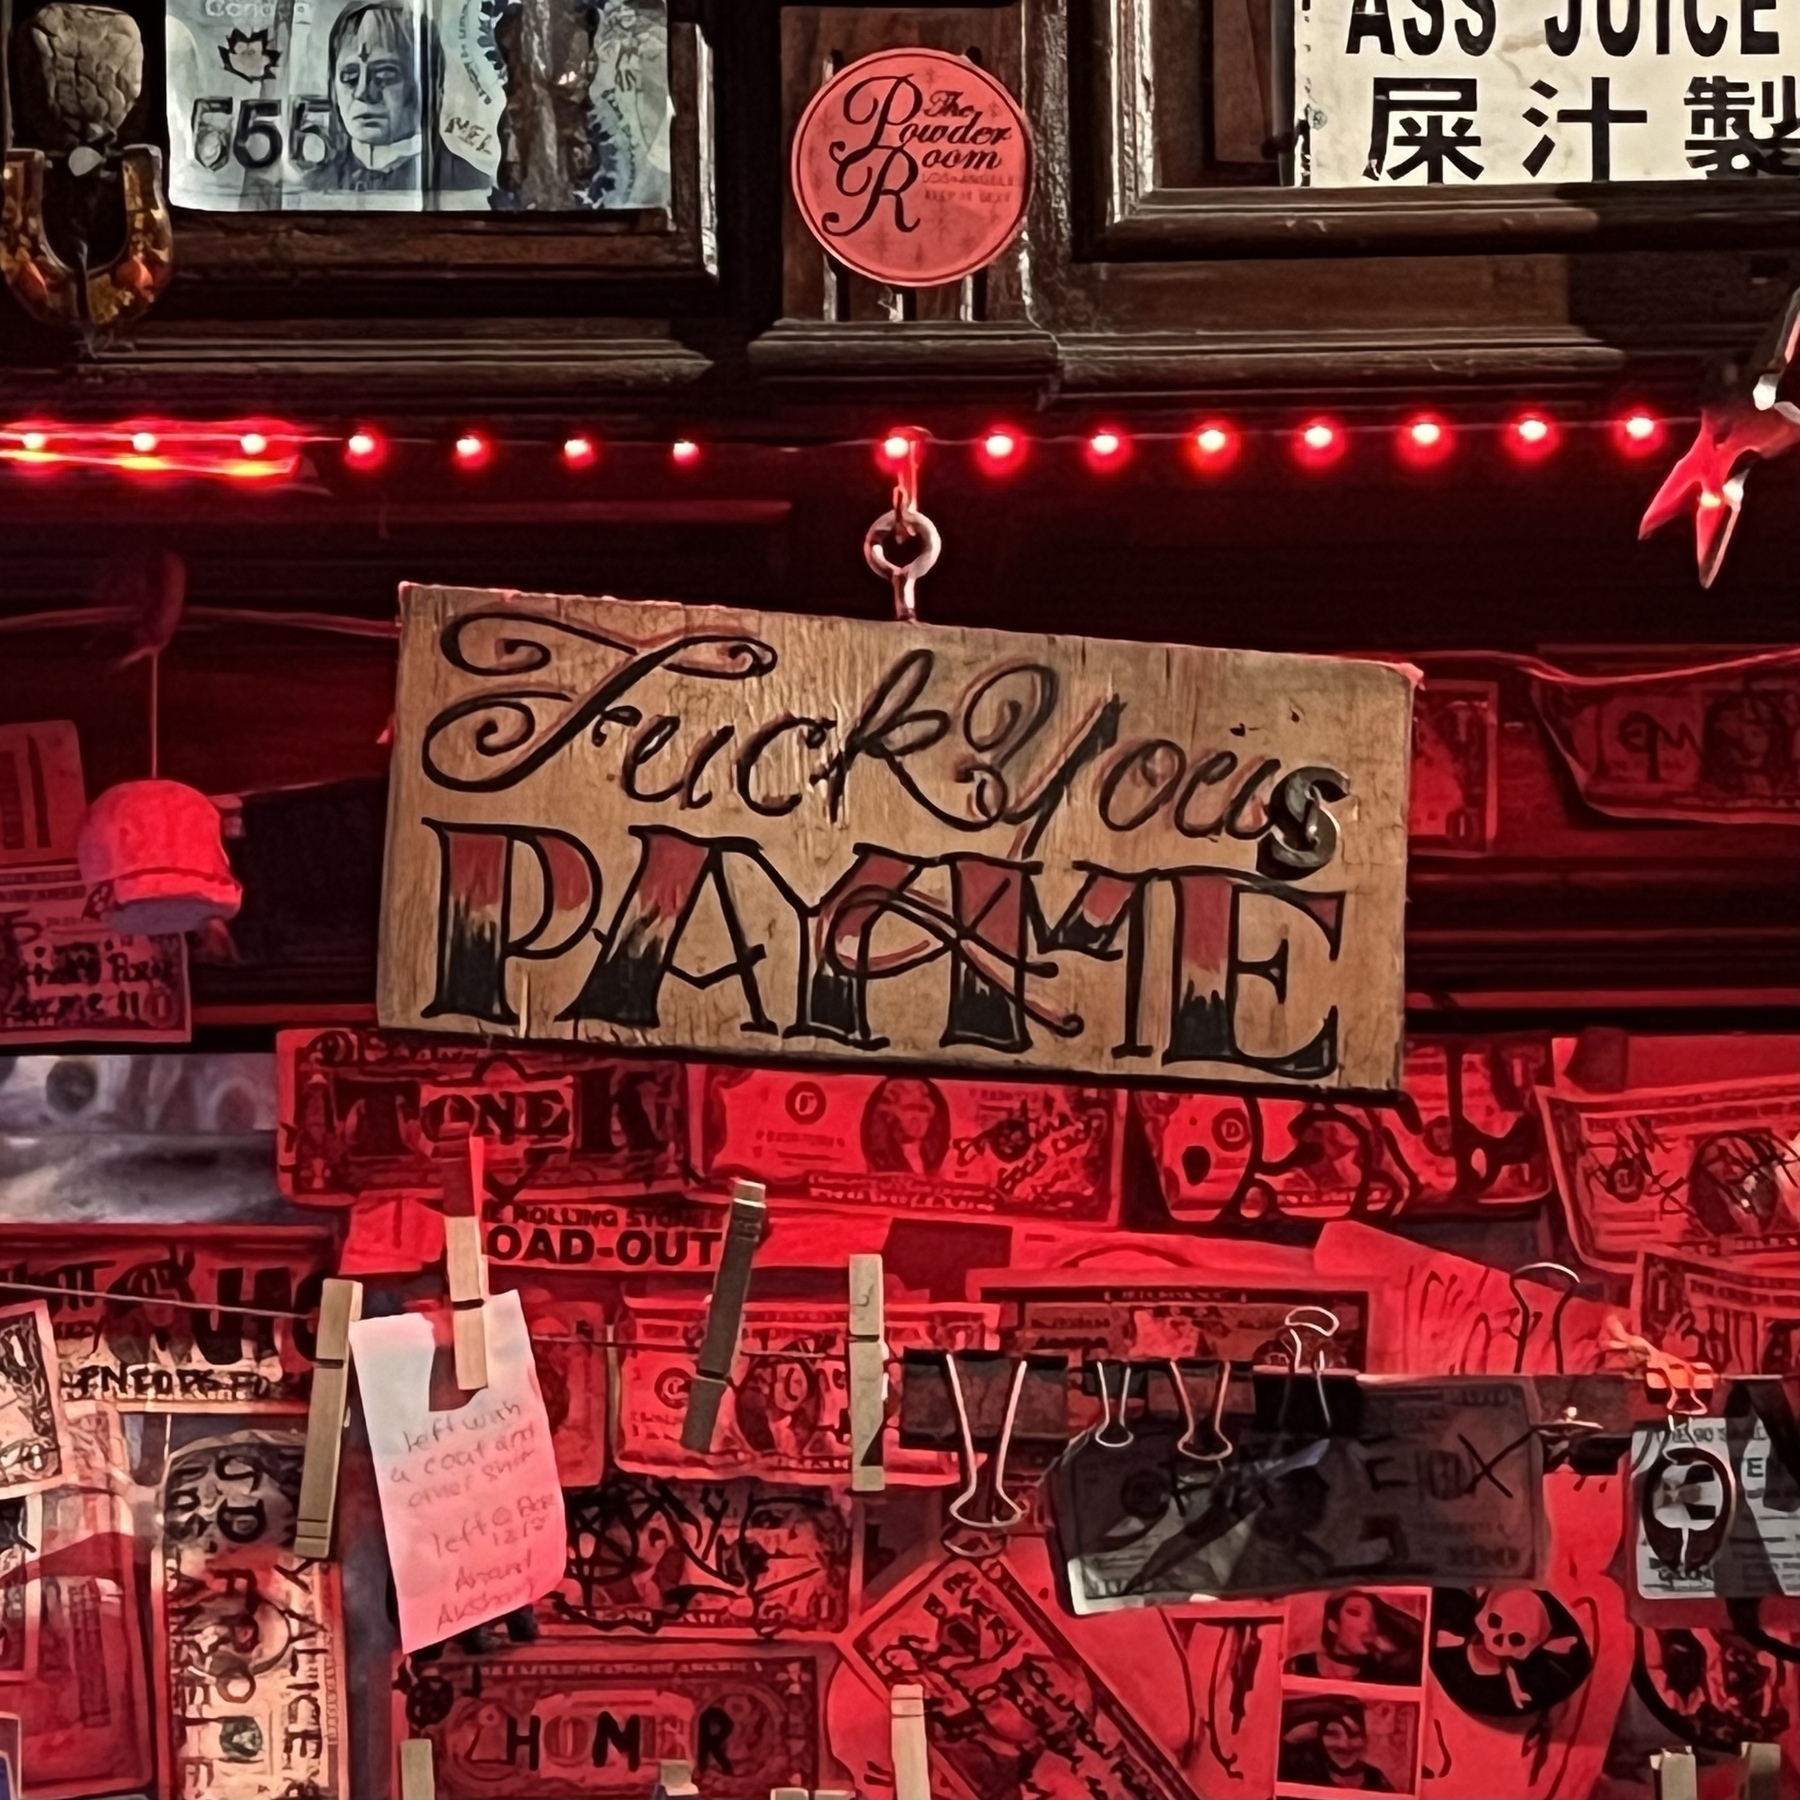 Photo of a sign hanging behind a bar among colorful red lights and autographed dollar bills. The sign reads “Fuck You(s) Pay Me”